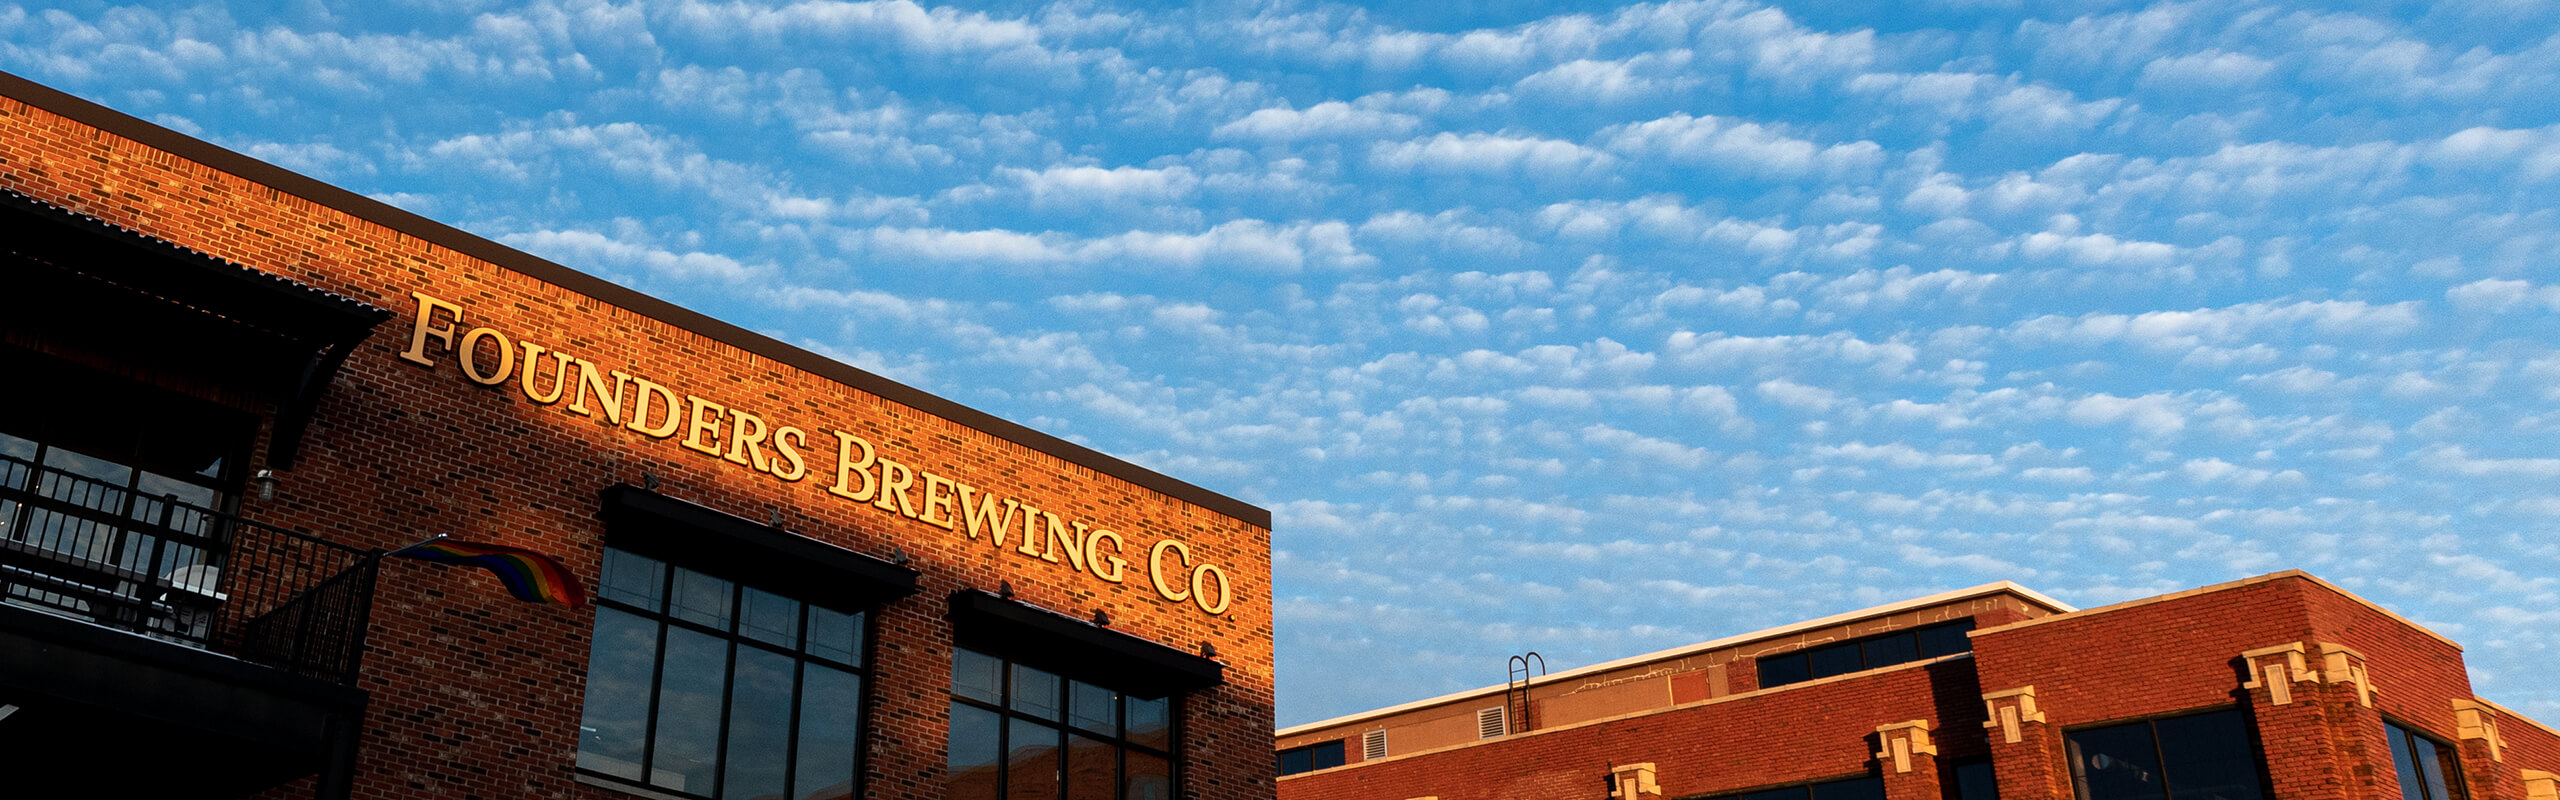 Exterior of Founders Brewing Co. building in sunlight with blue sky